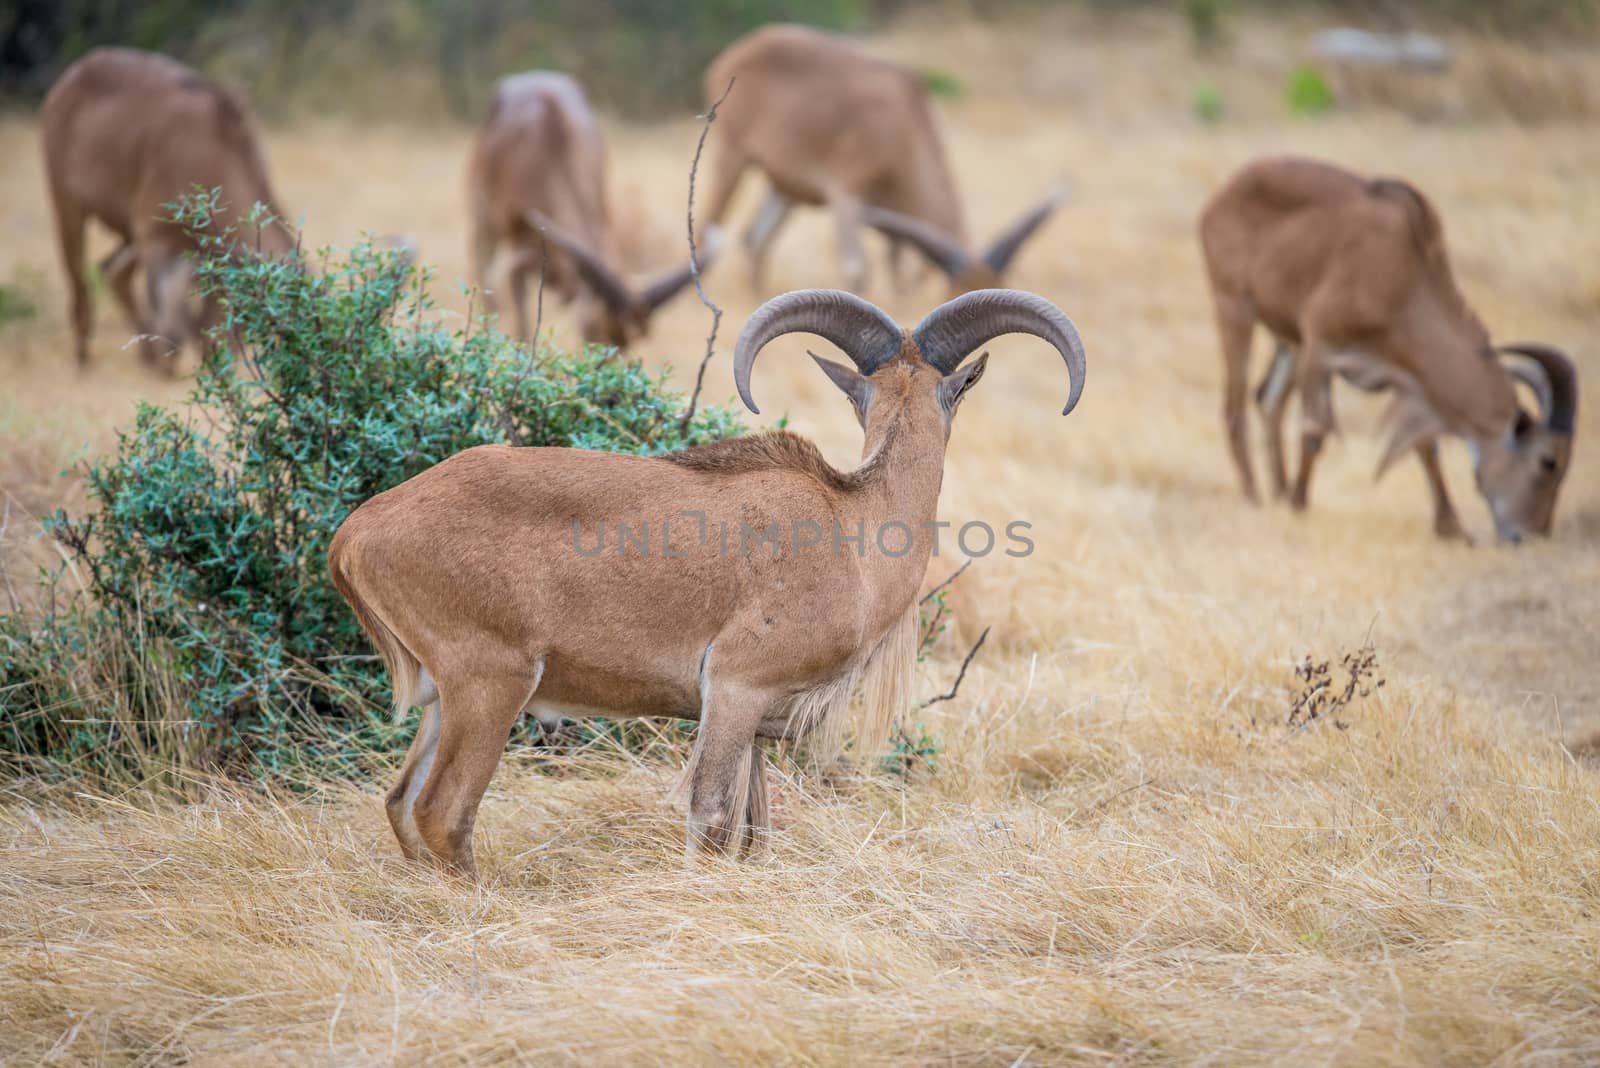 Aoudad Ram standing looking away from the camera